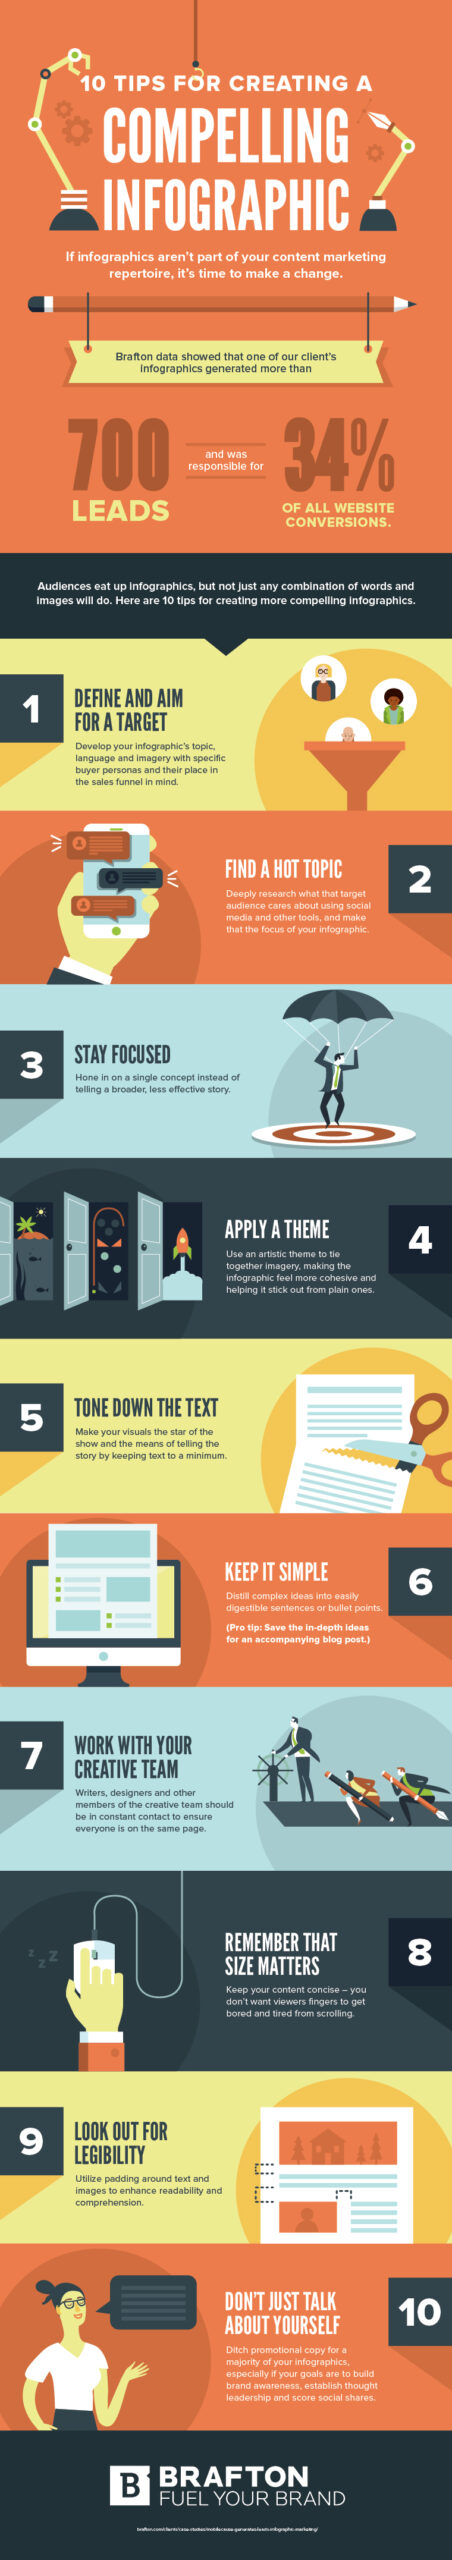 How to Make an Infographic: Guide and Helpful Links  Blog - EssayShark